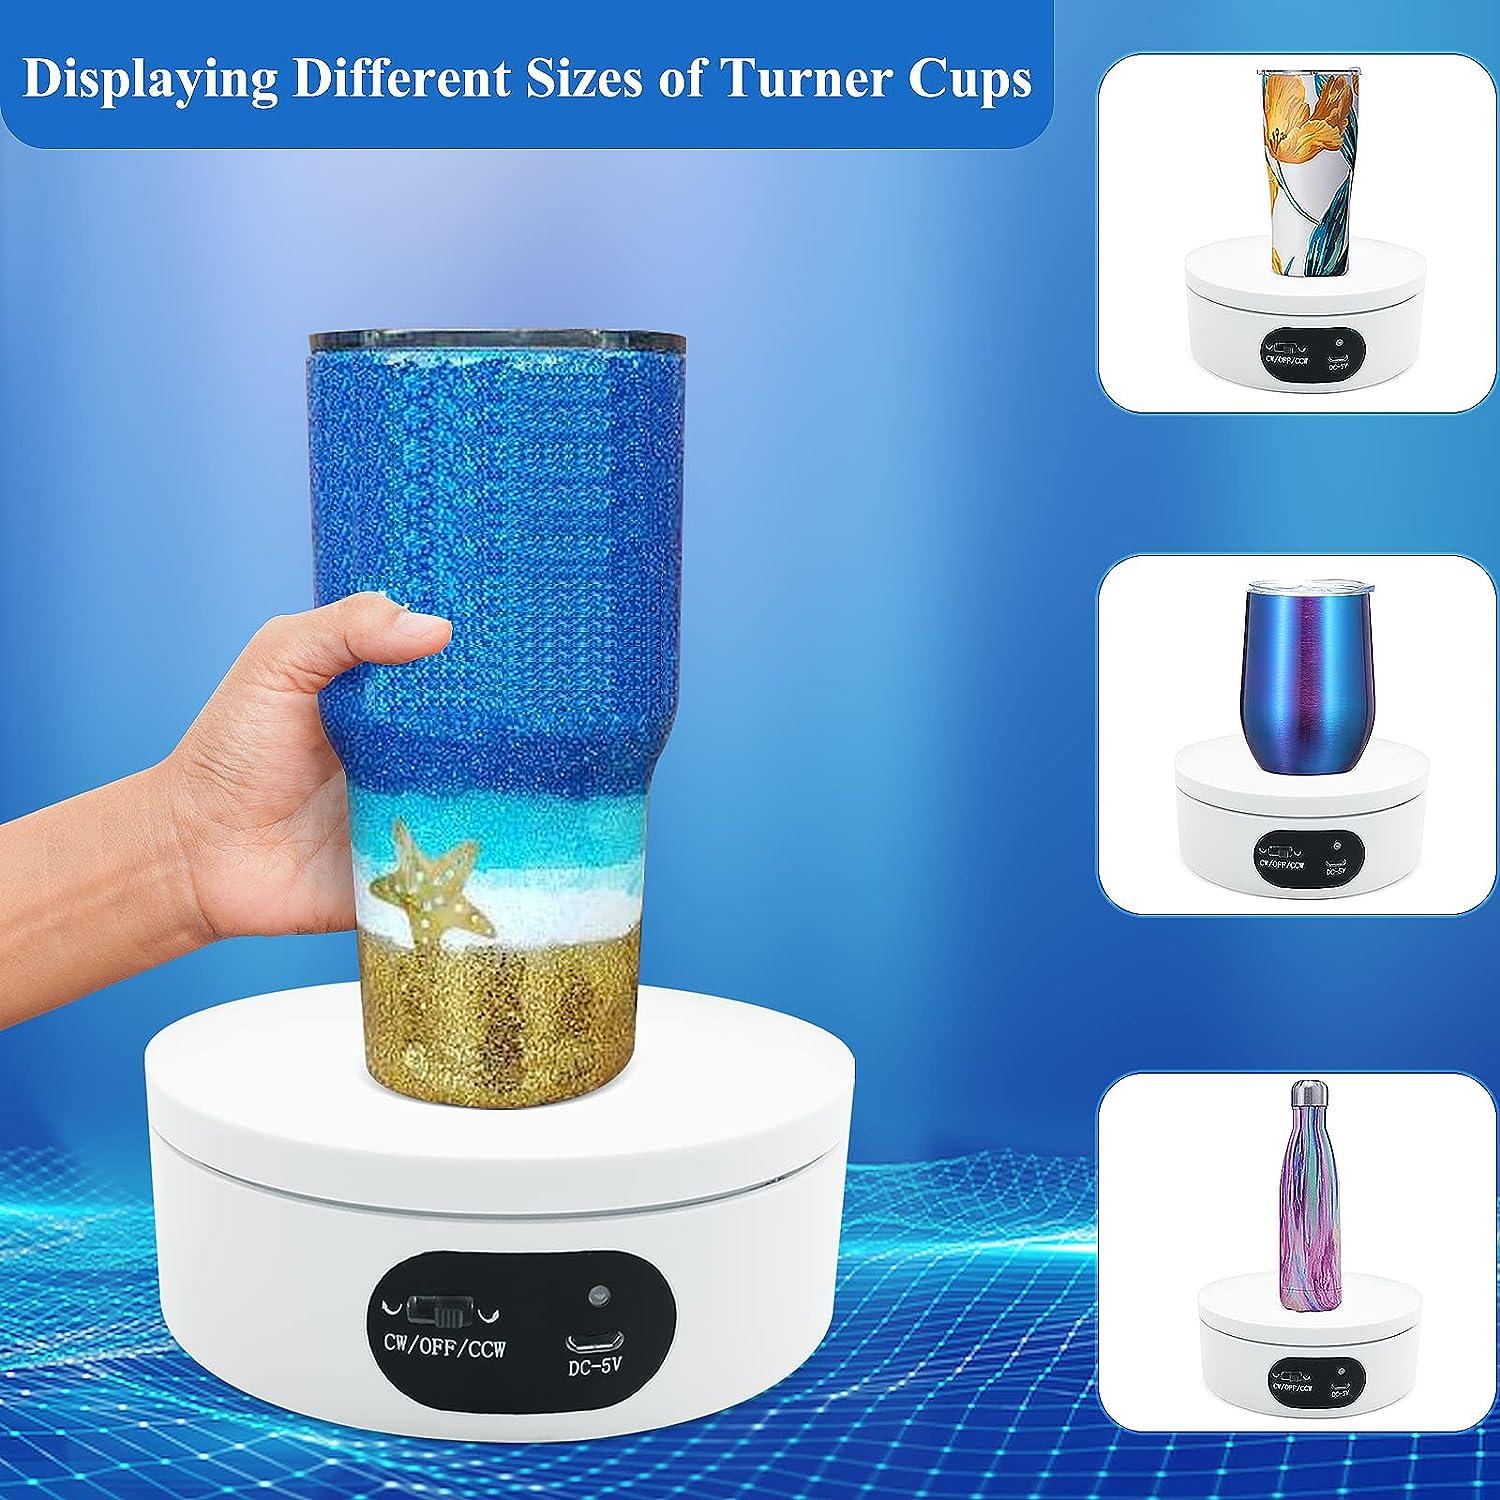  Turner Cup Rotating Display Stand for Epoxy Glitter